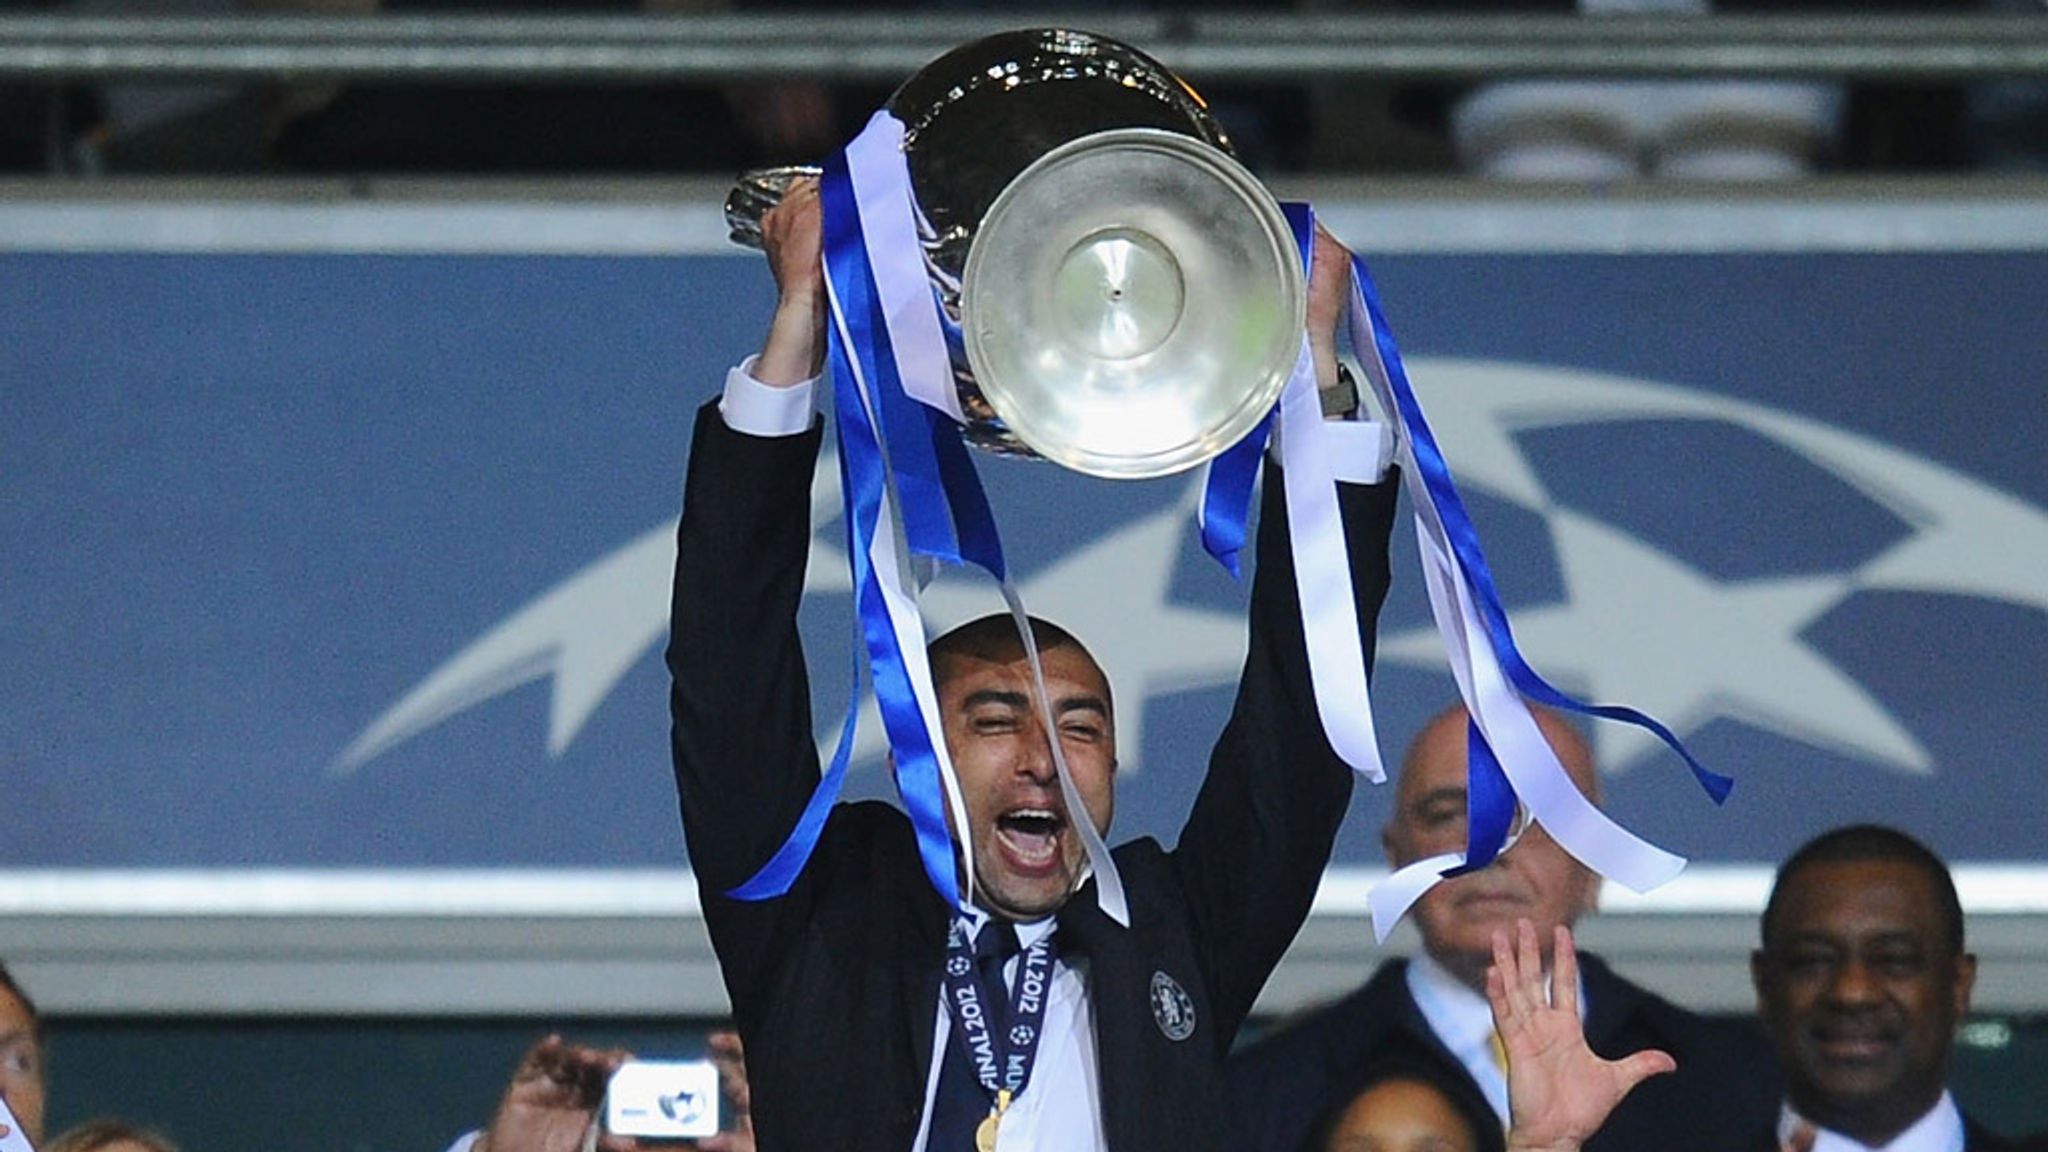 Champions League: How Roberto di Matteo masterminded Chelsea's magical win  in Munich | Football News | Sky Sports